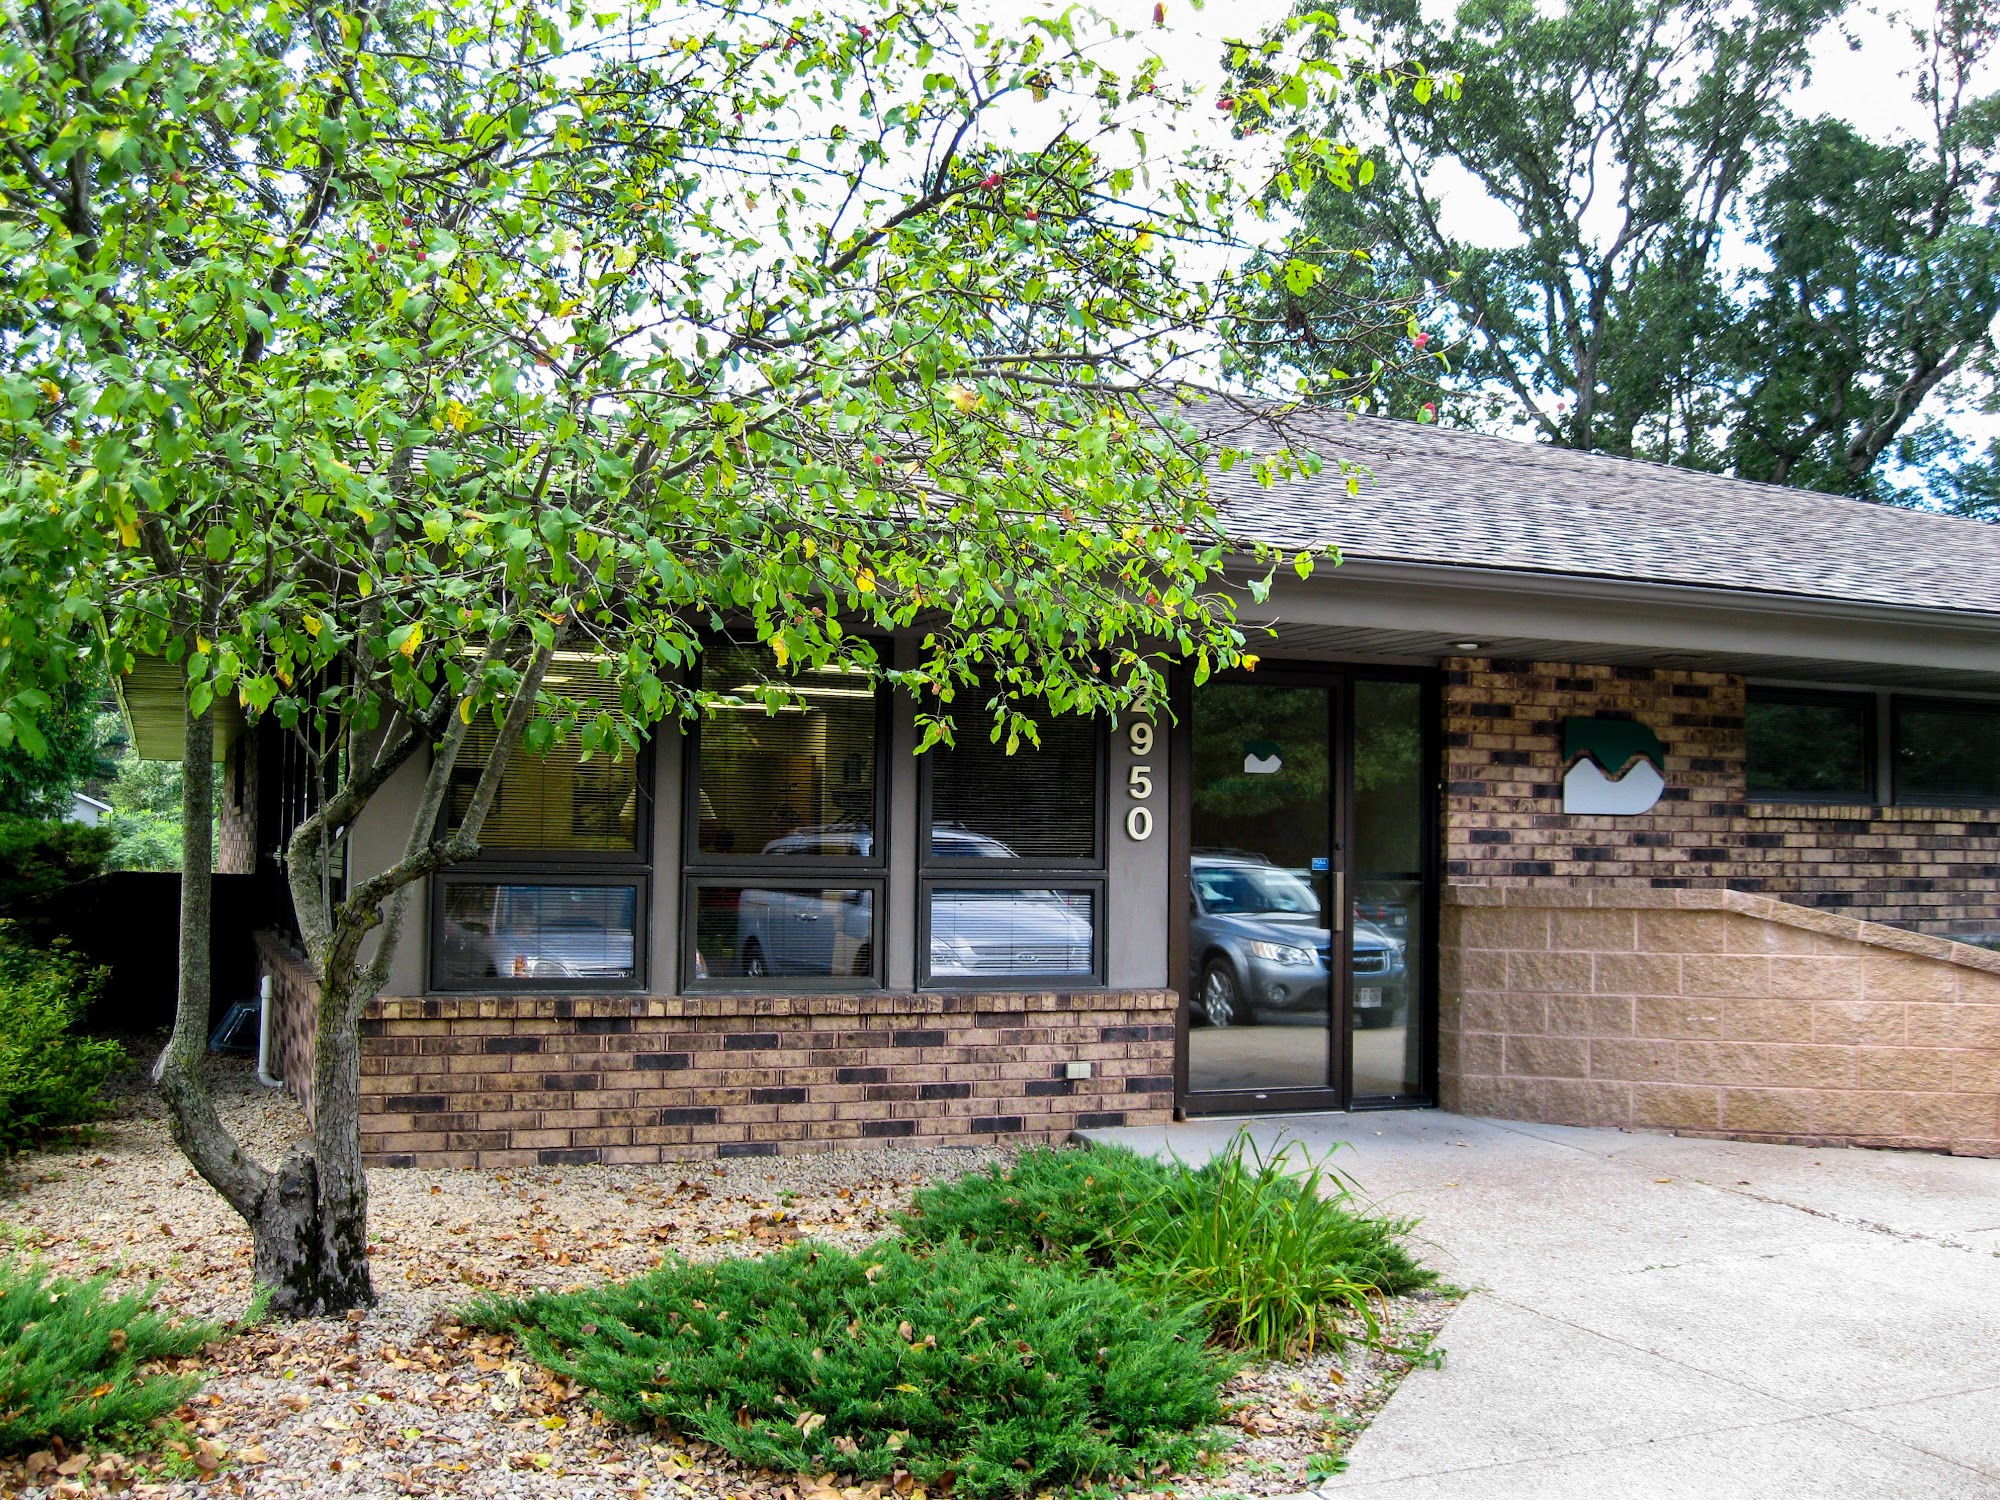 Midwest Dental 2950 Bea Jay Ln, Plover Wisconsin 54467